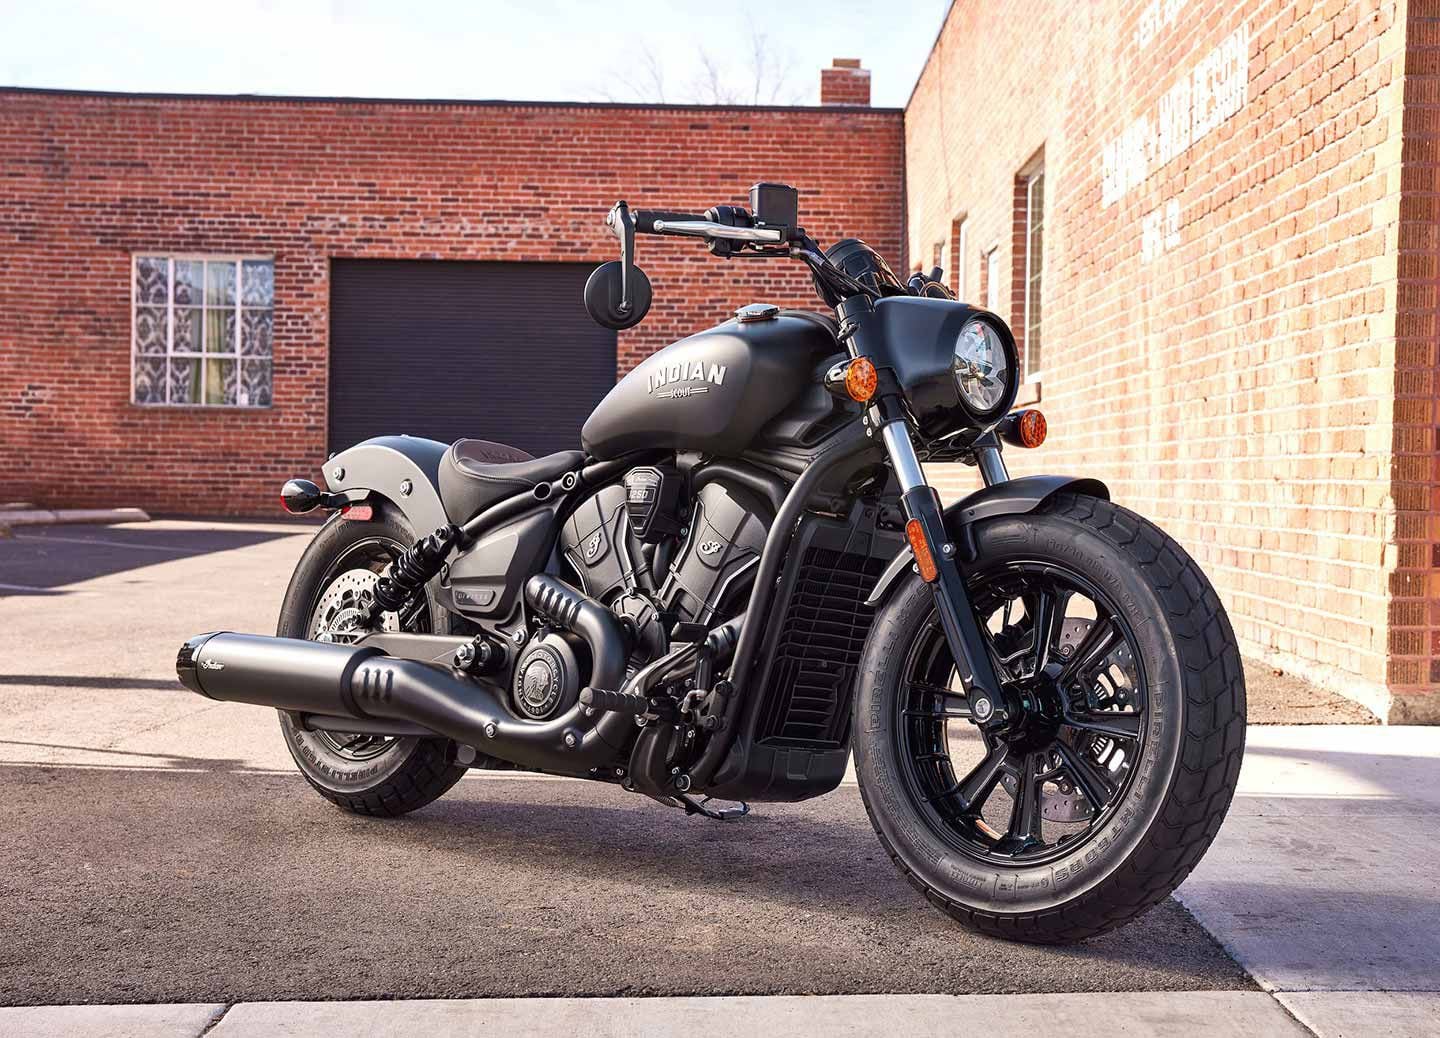 The 2025 Scout Bobber keeps the moody black-out look of its predecessor, with slammed suspension and chunky 16-inch tires, but gets a new engine and exhaust.